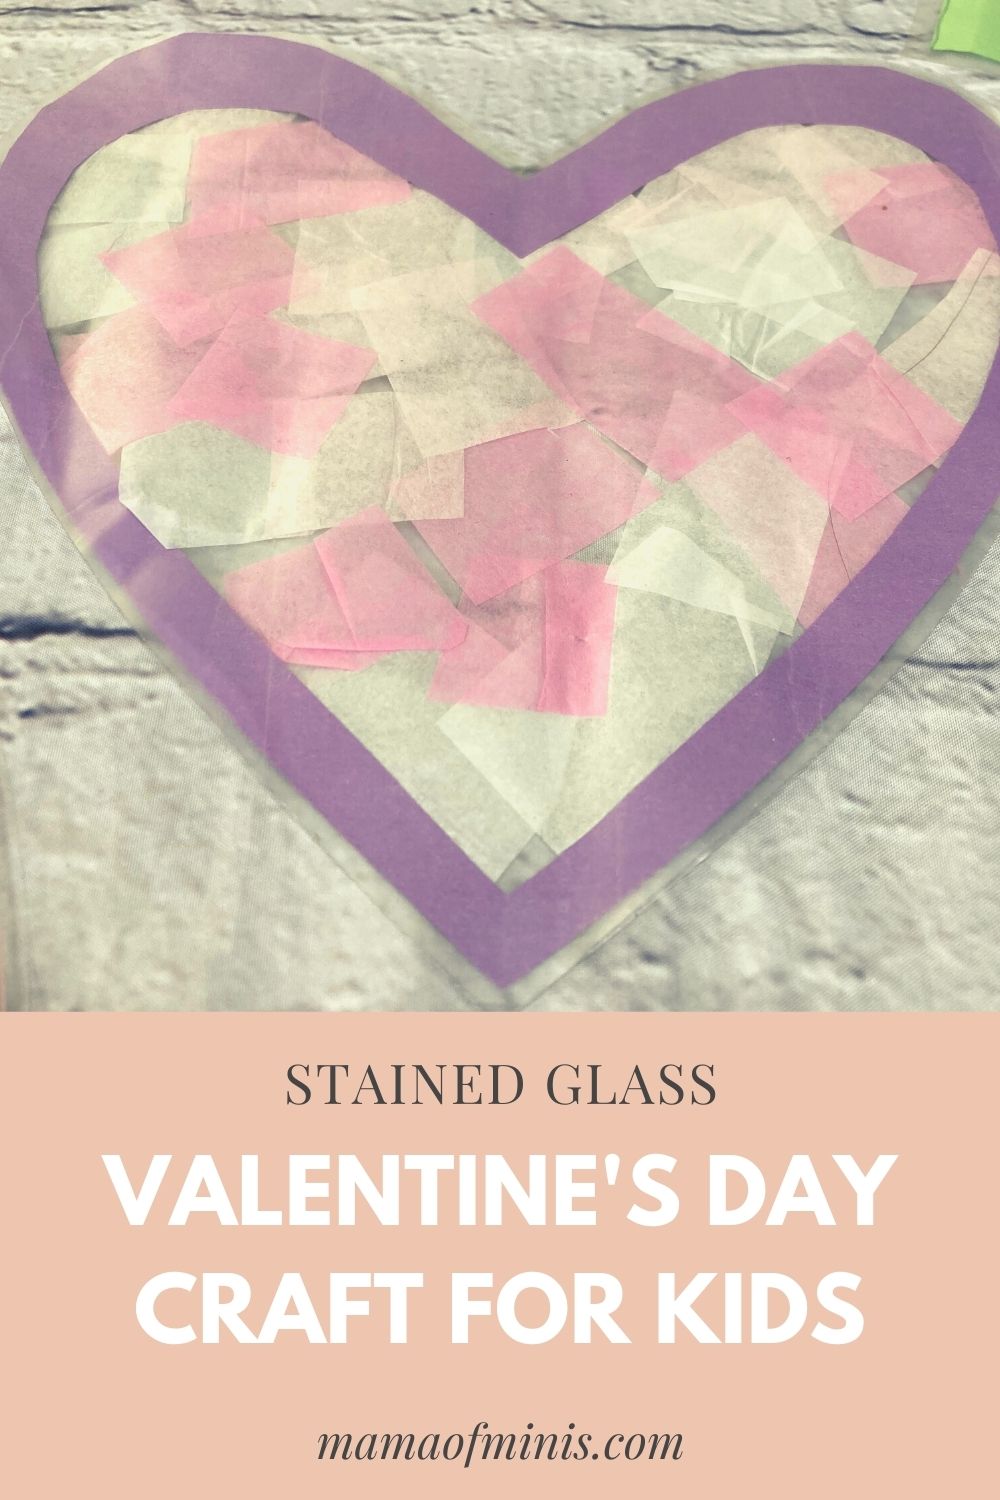 Stained Glass Valentine's Day Craft for Kids Pin